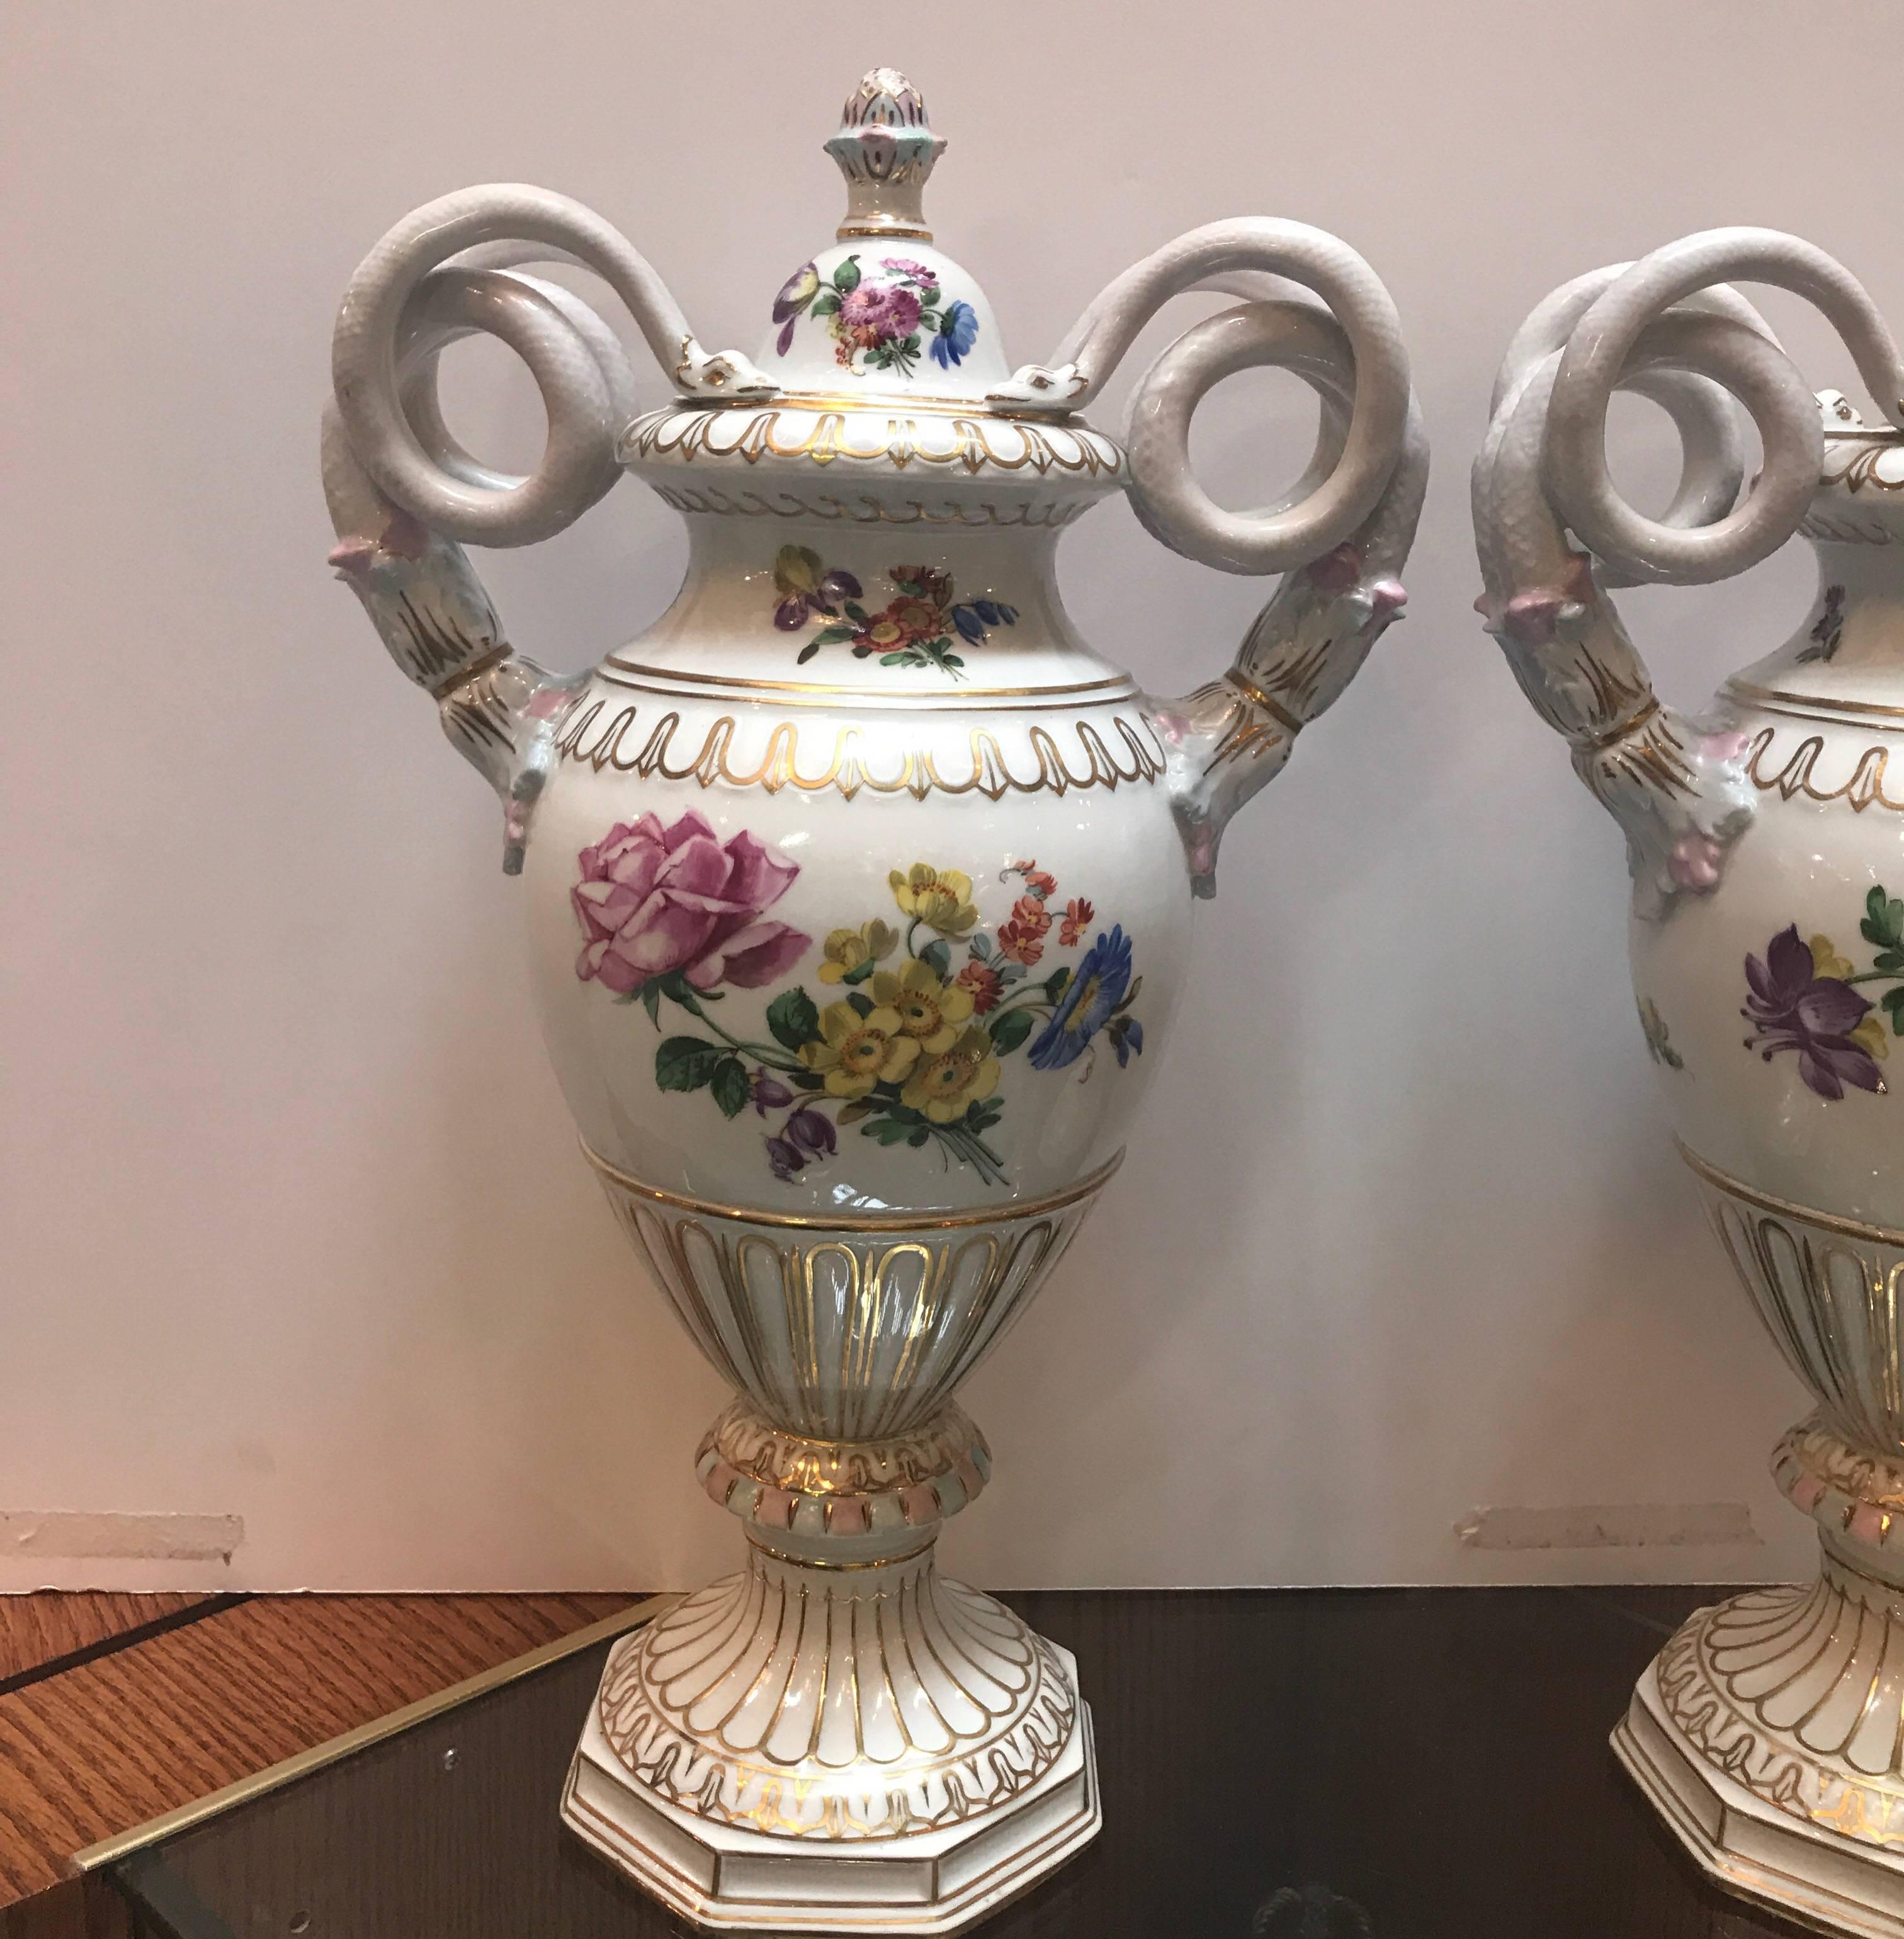 A pair of hand-painted porcelain urns with a Dresden mark. The lidded urns with classic snake handles with gilt decoration all over. The centers with hand-painted Dresden floral bouquets on both sides. The mark is the registered mark for Dresden